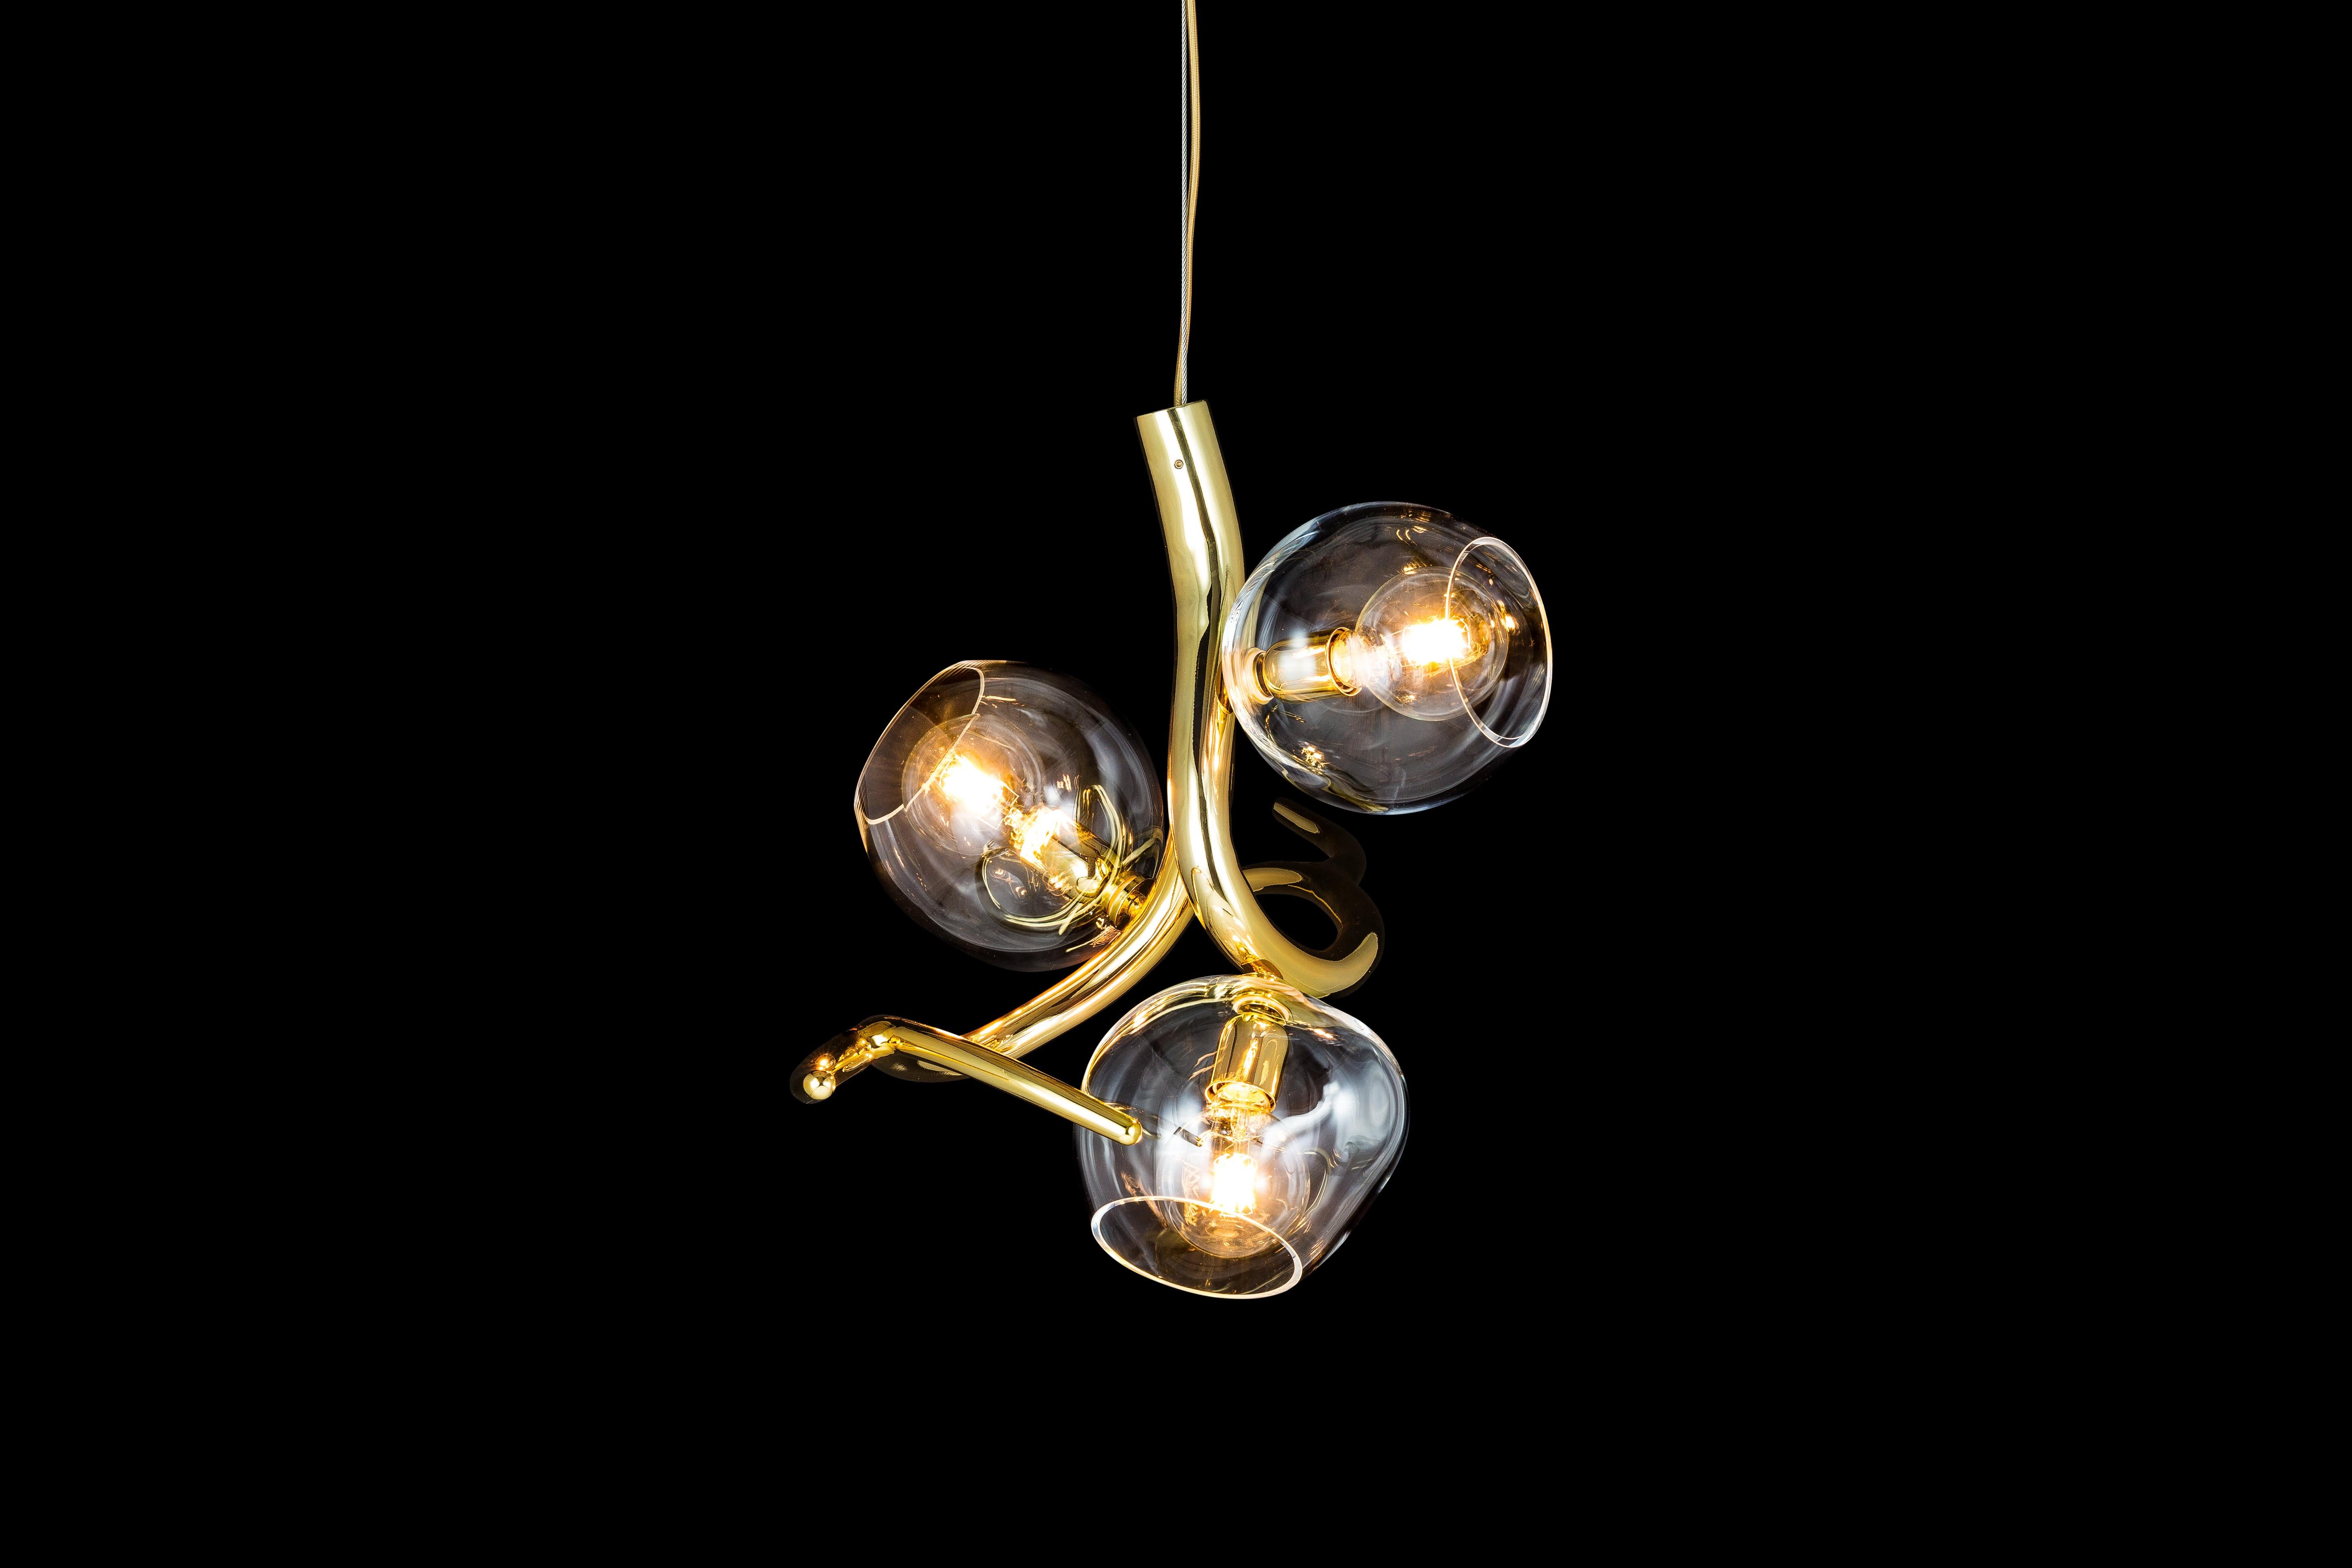 Named after the ancient Greek Goddess of dew, this Ersa modern pendant in a brass burnished finish with iridescent glass spheres offers light with a sculptural touch for every possible position or space. The Ersa pendant is available with one, two